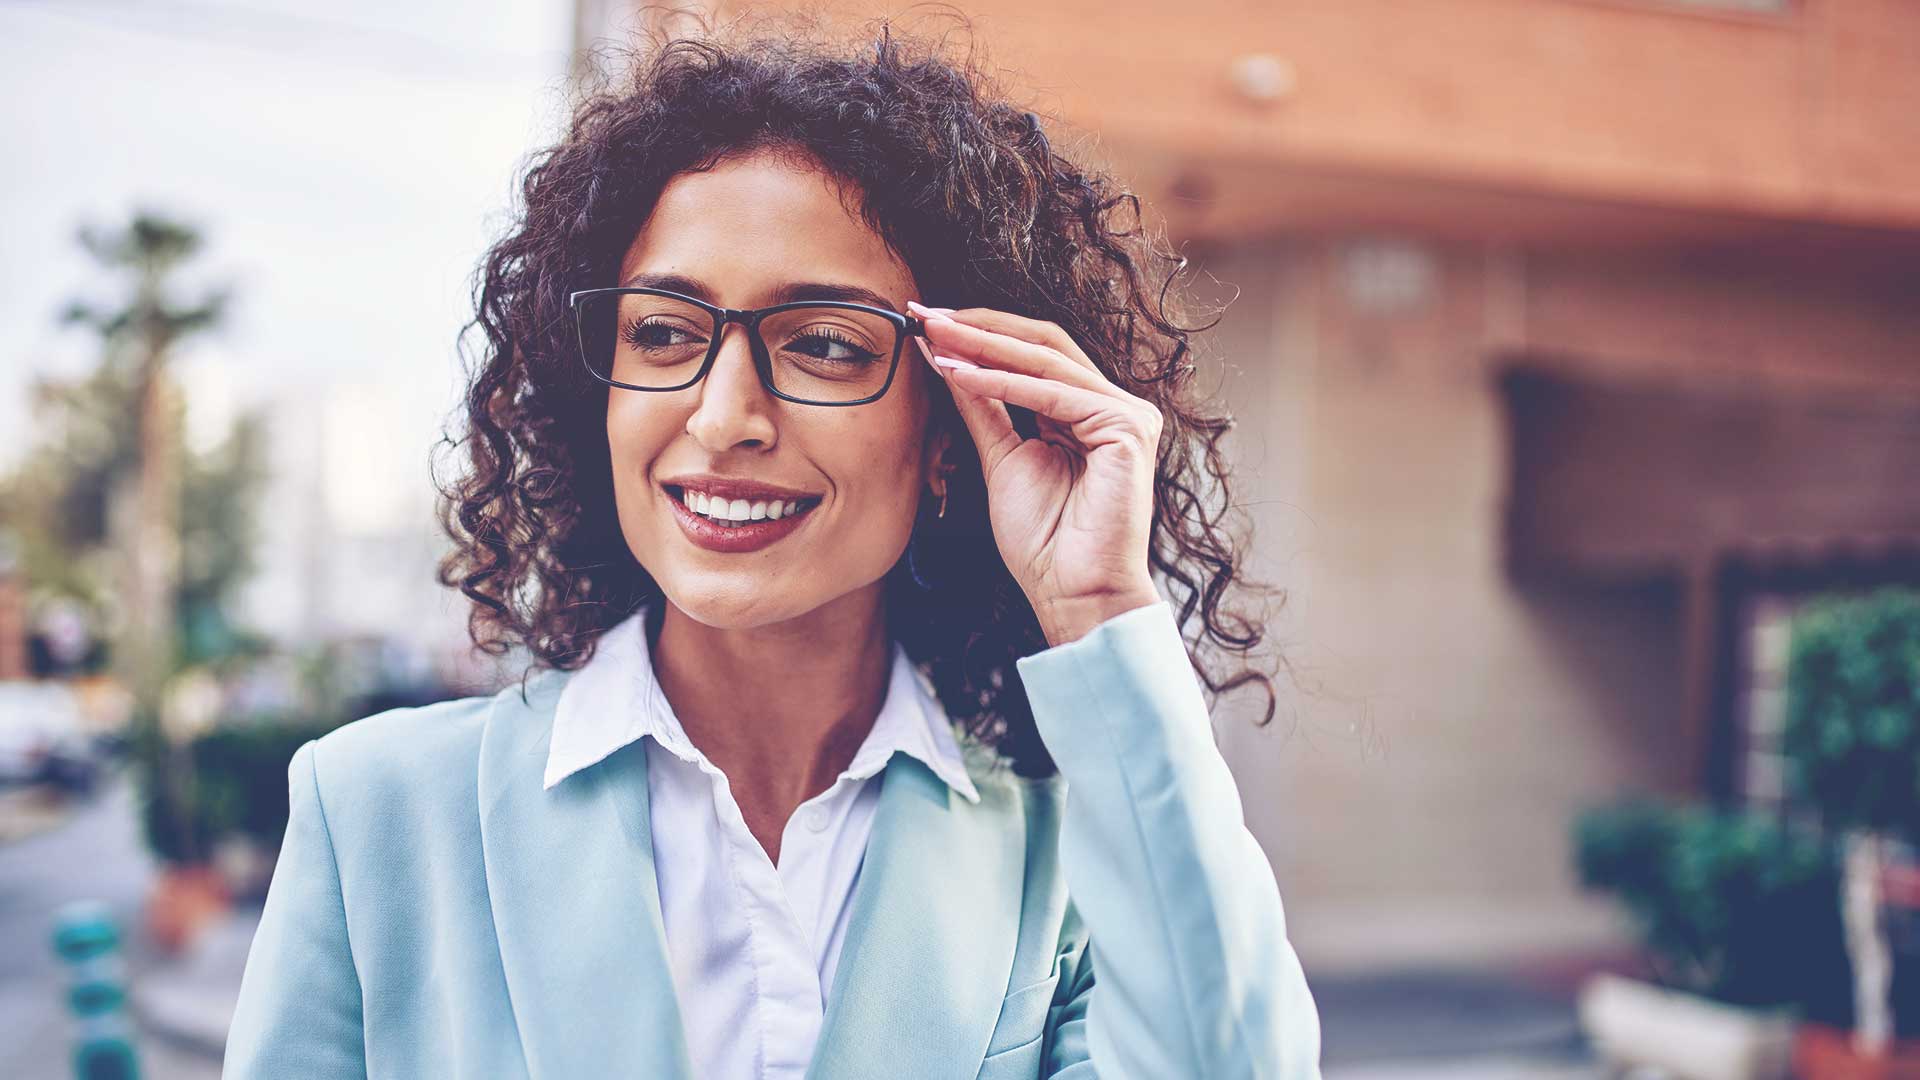 professional woman with curly hair adjusting her glasses